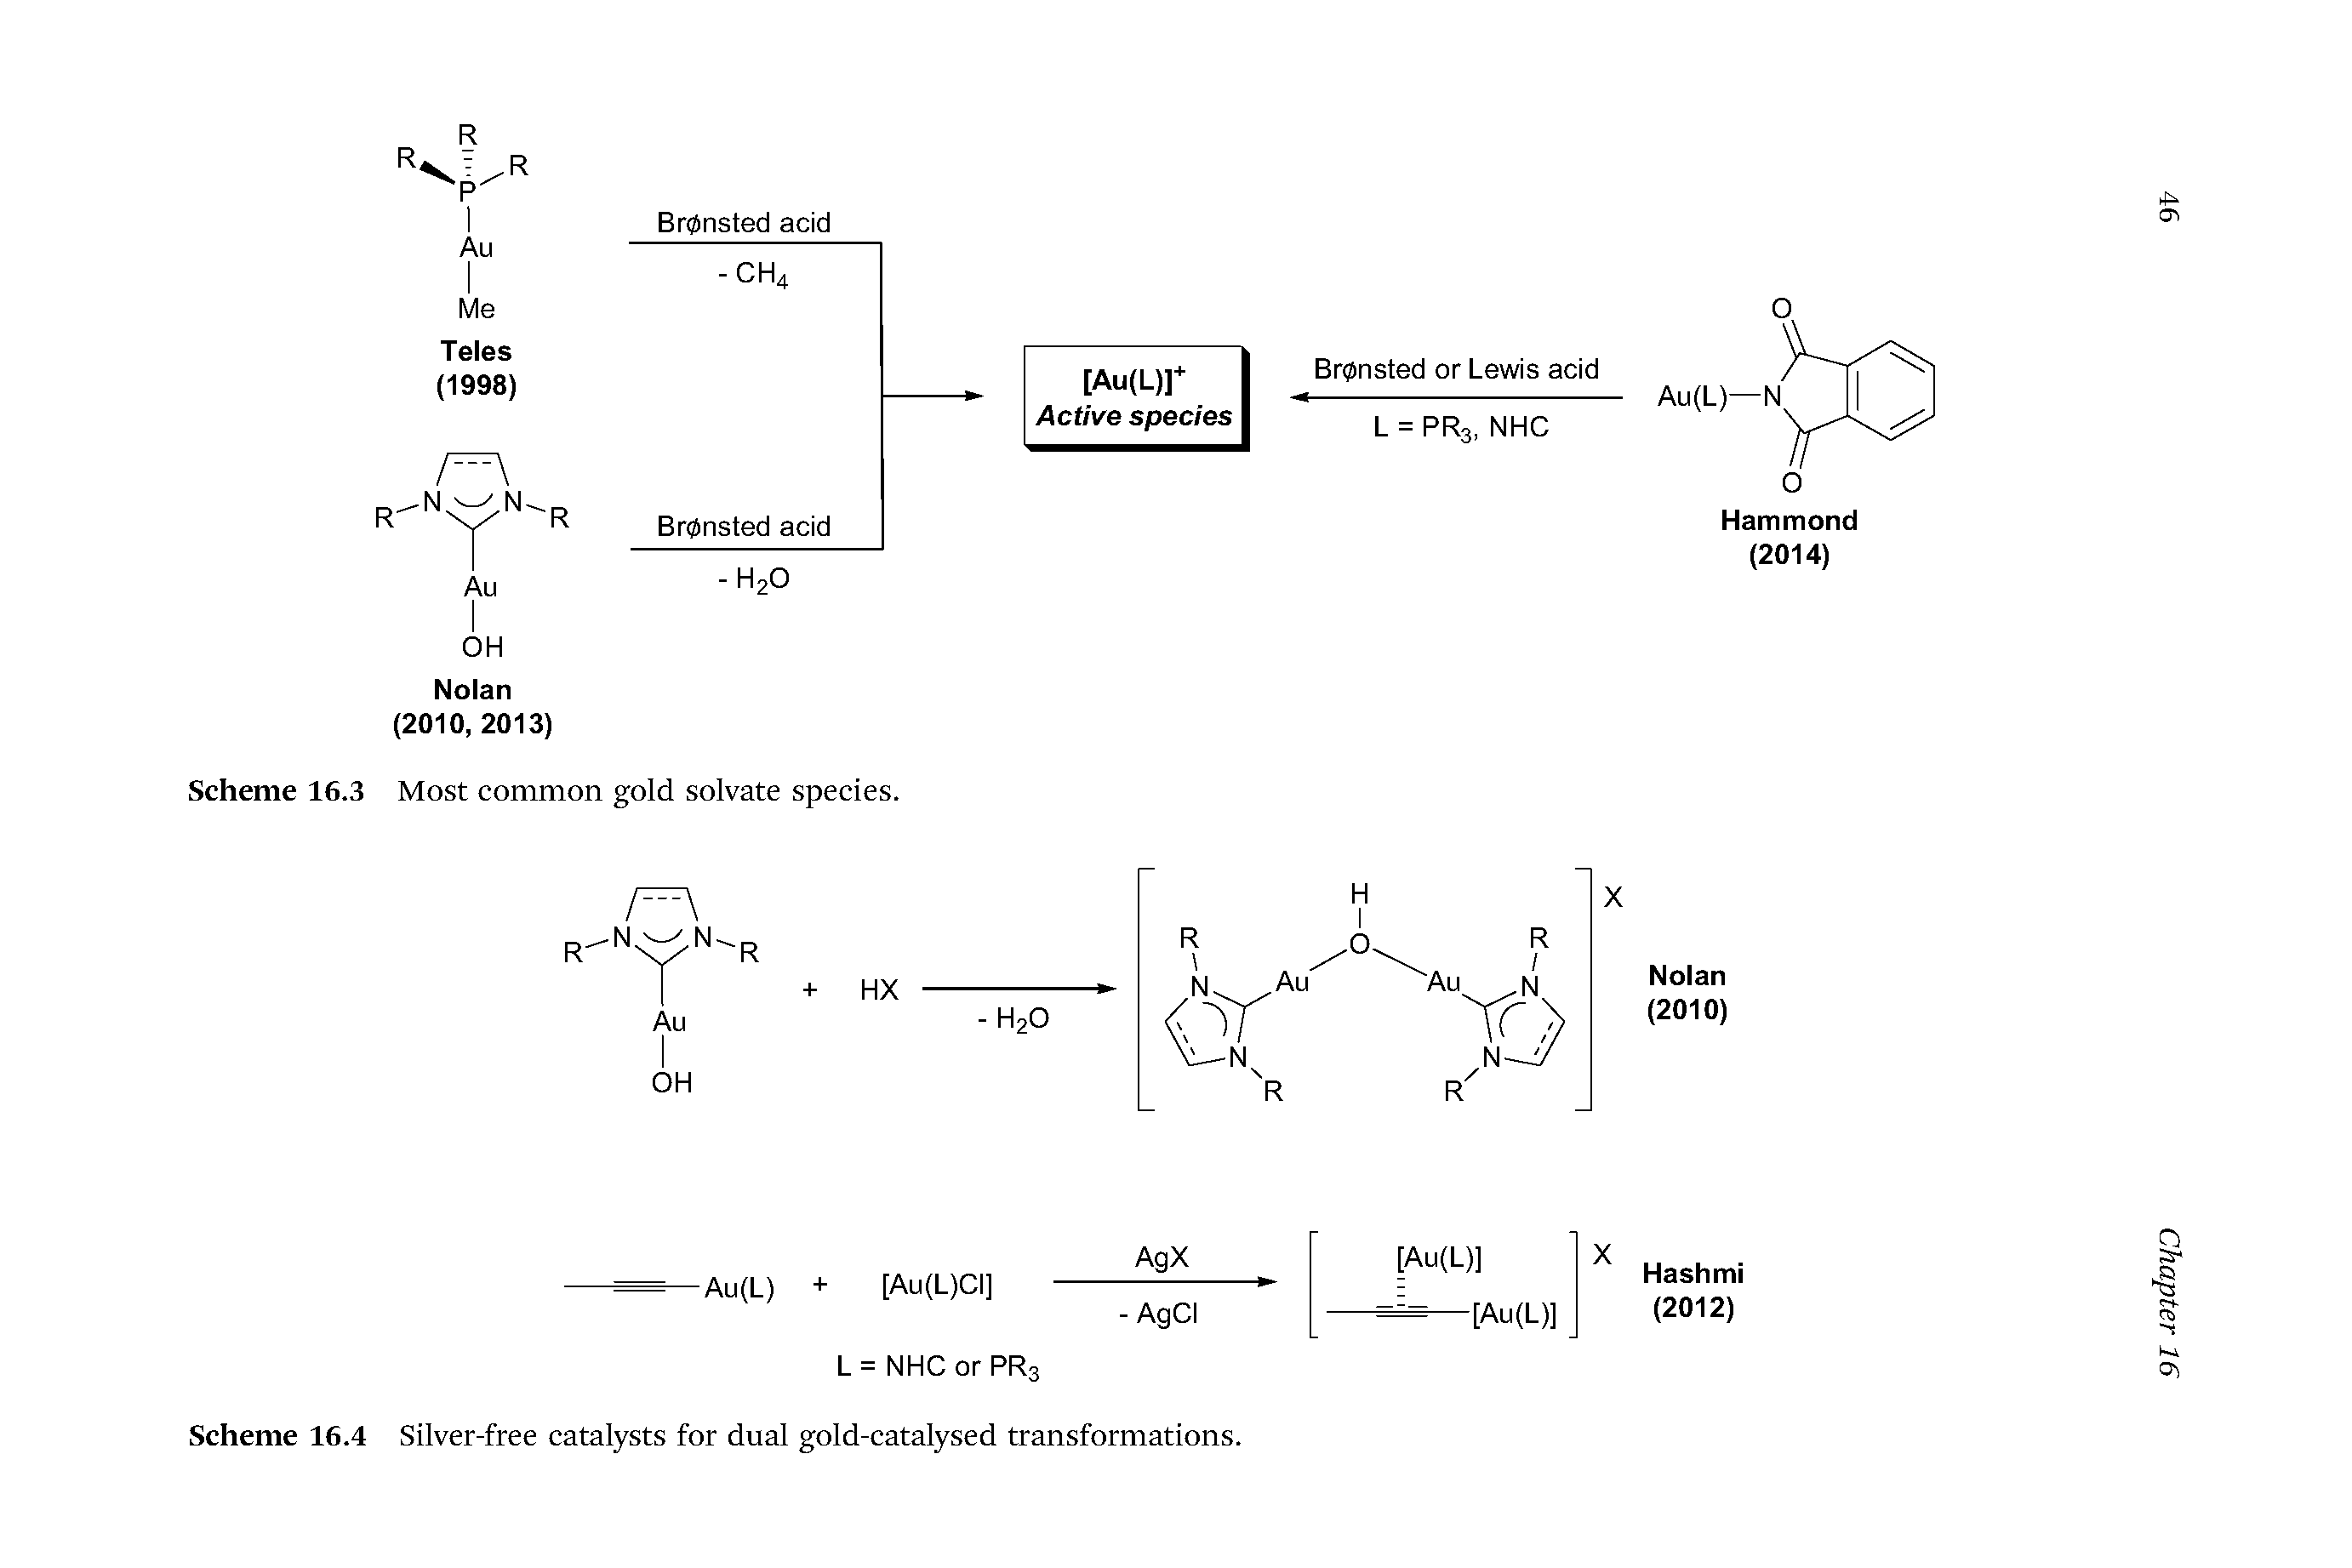 Scheme 16.4 Silver-free catalysts for dual gold-catalysed transformations.